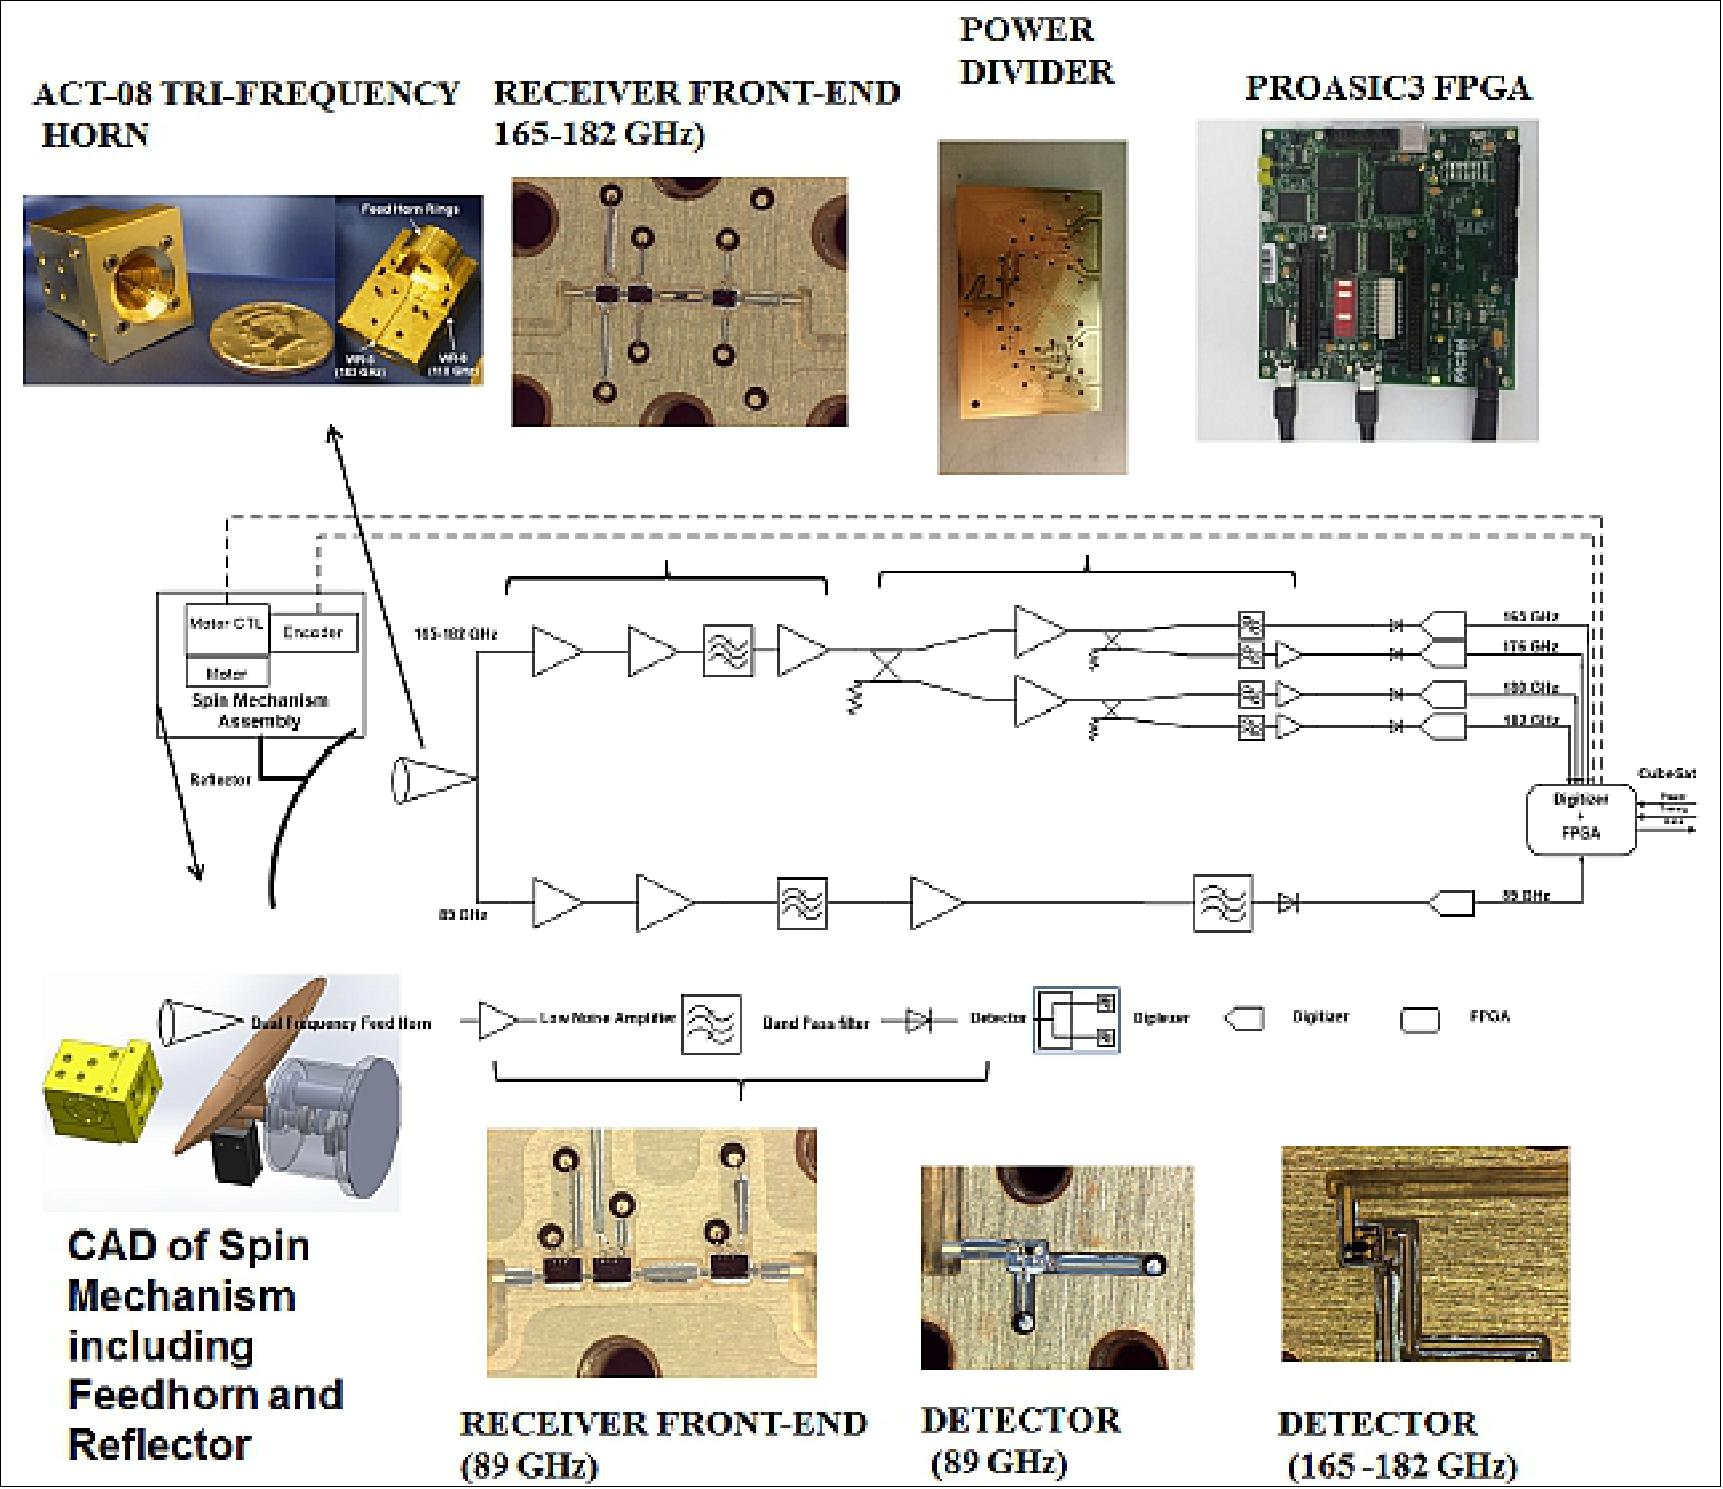 Figure 12: Instrument block diagram and photos of components (image credit: TEMPEST-D collaboration)